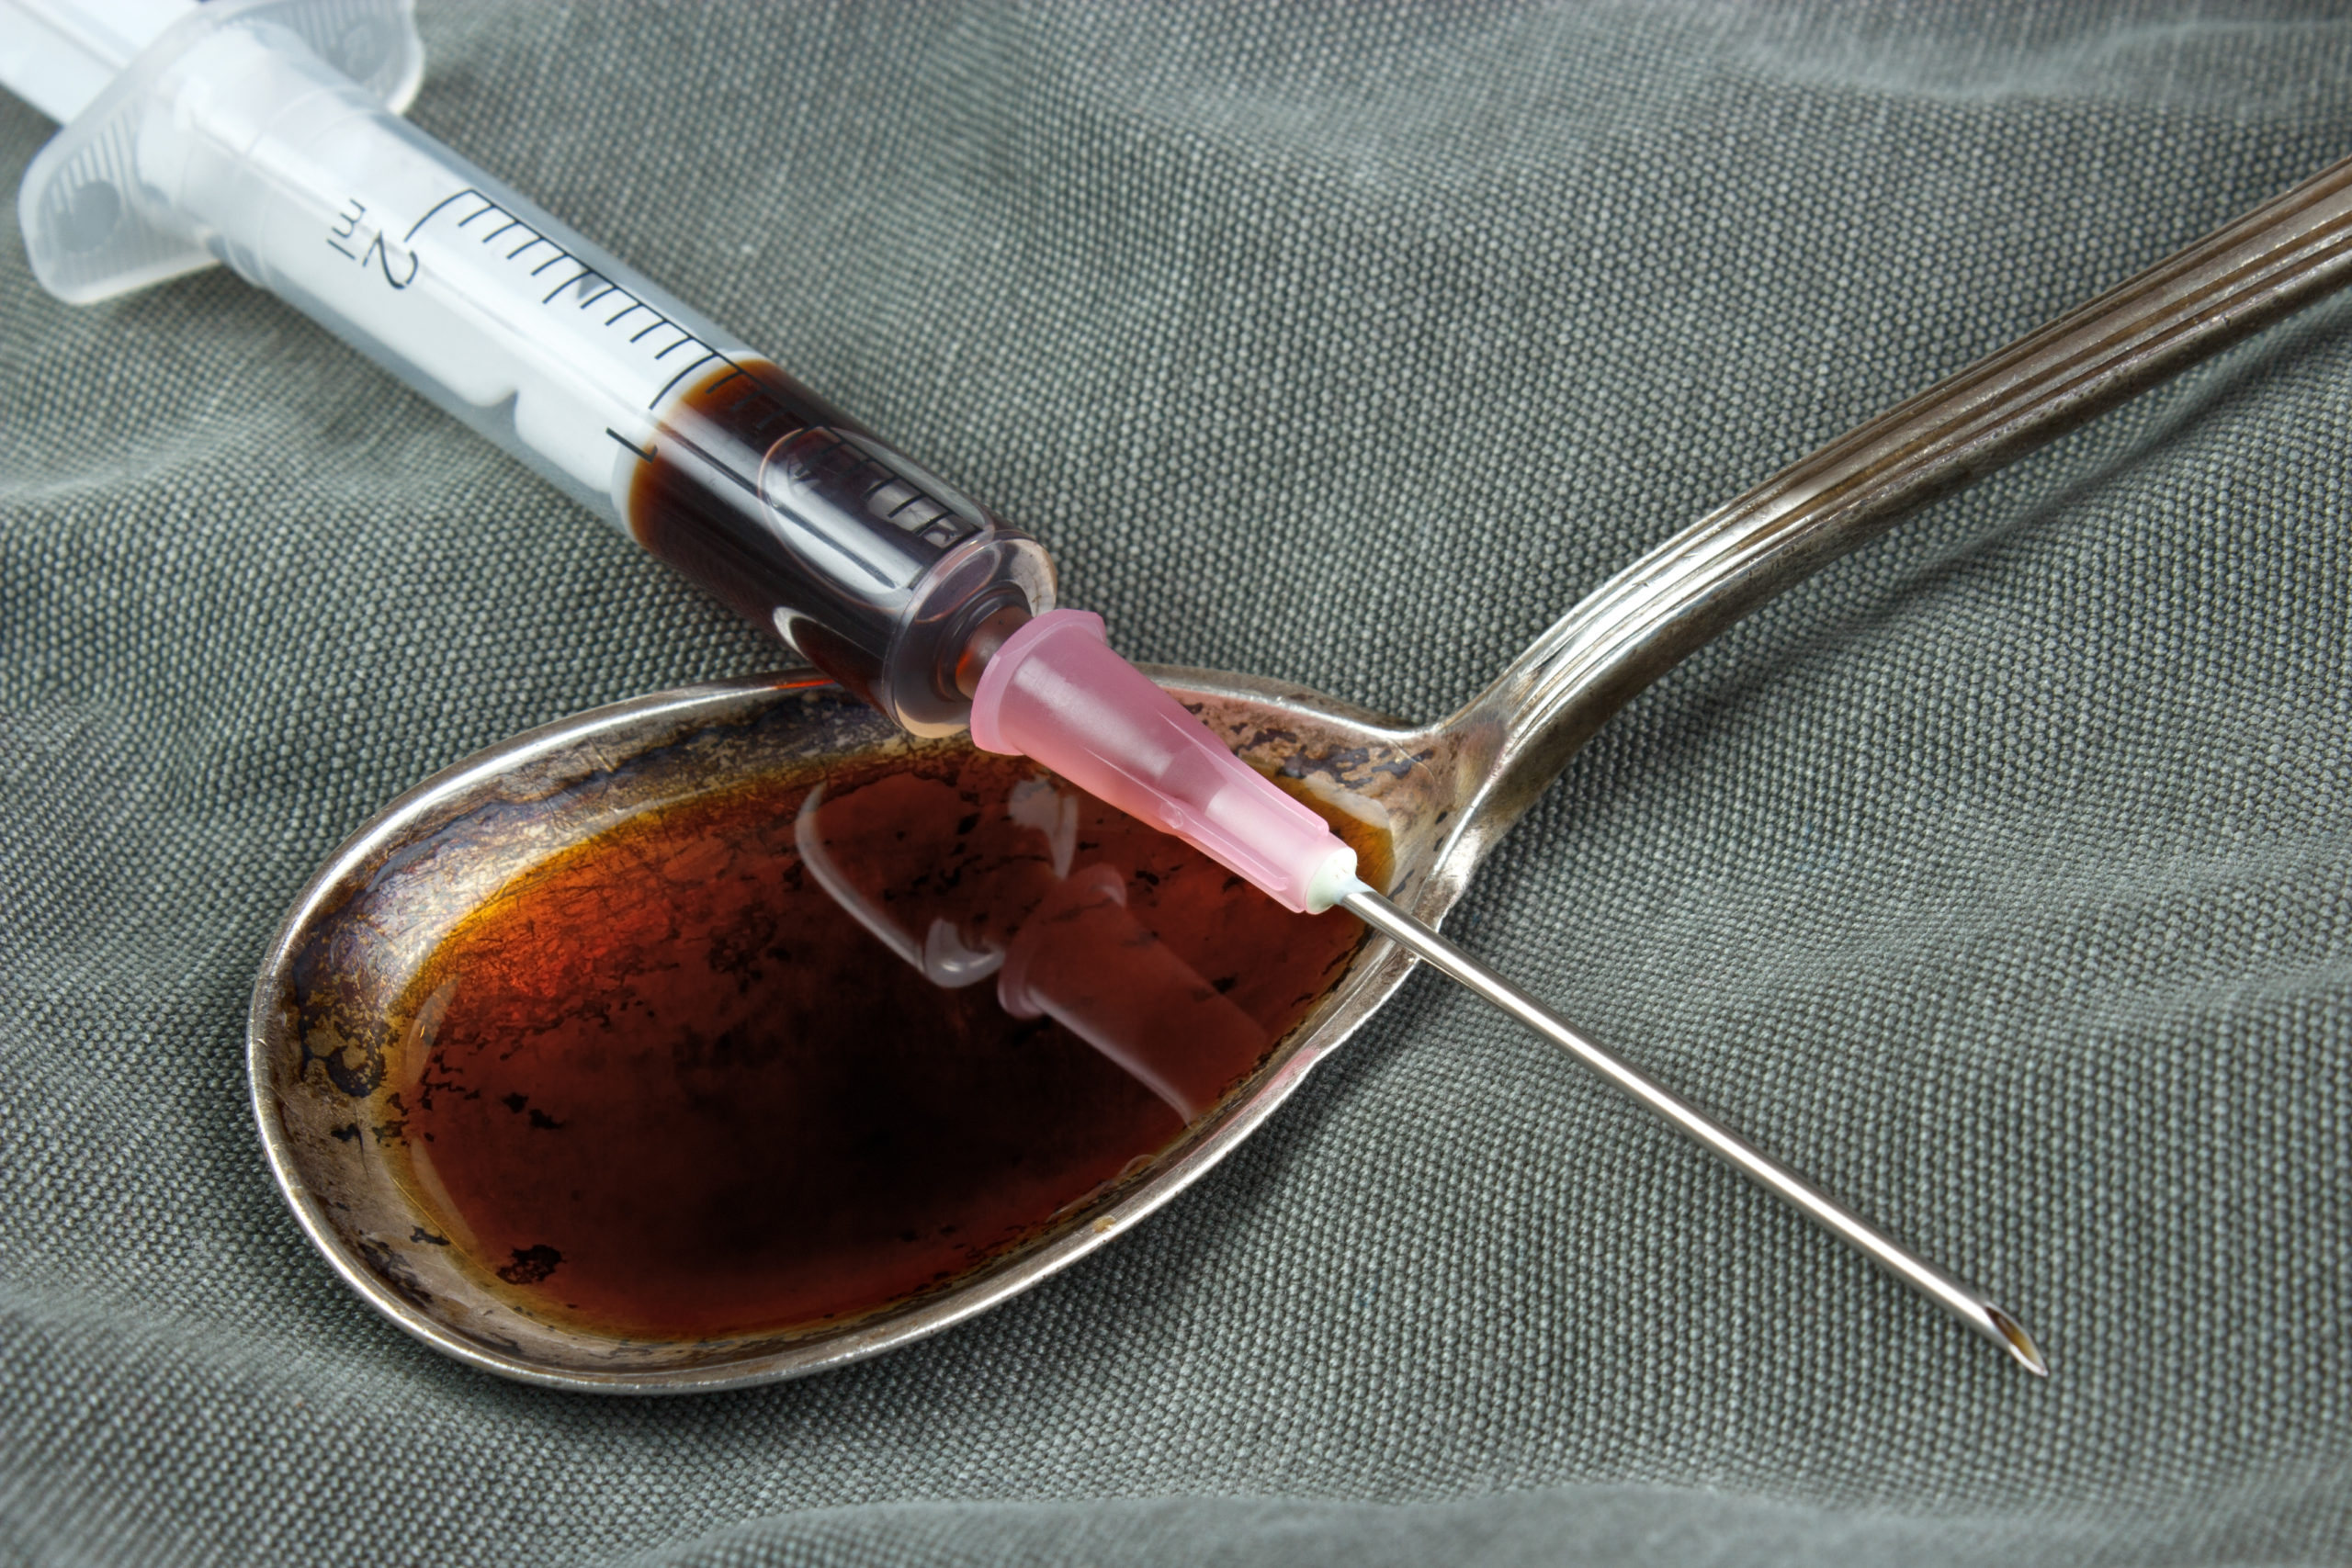 L.A. Warning Issued About Contaminated Heroin